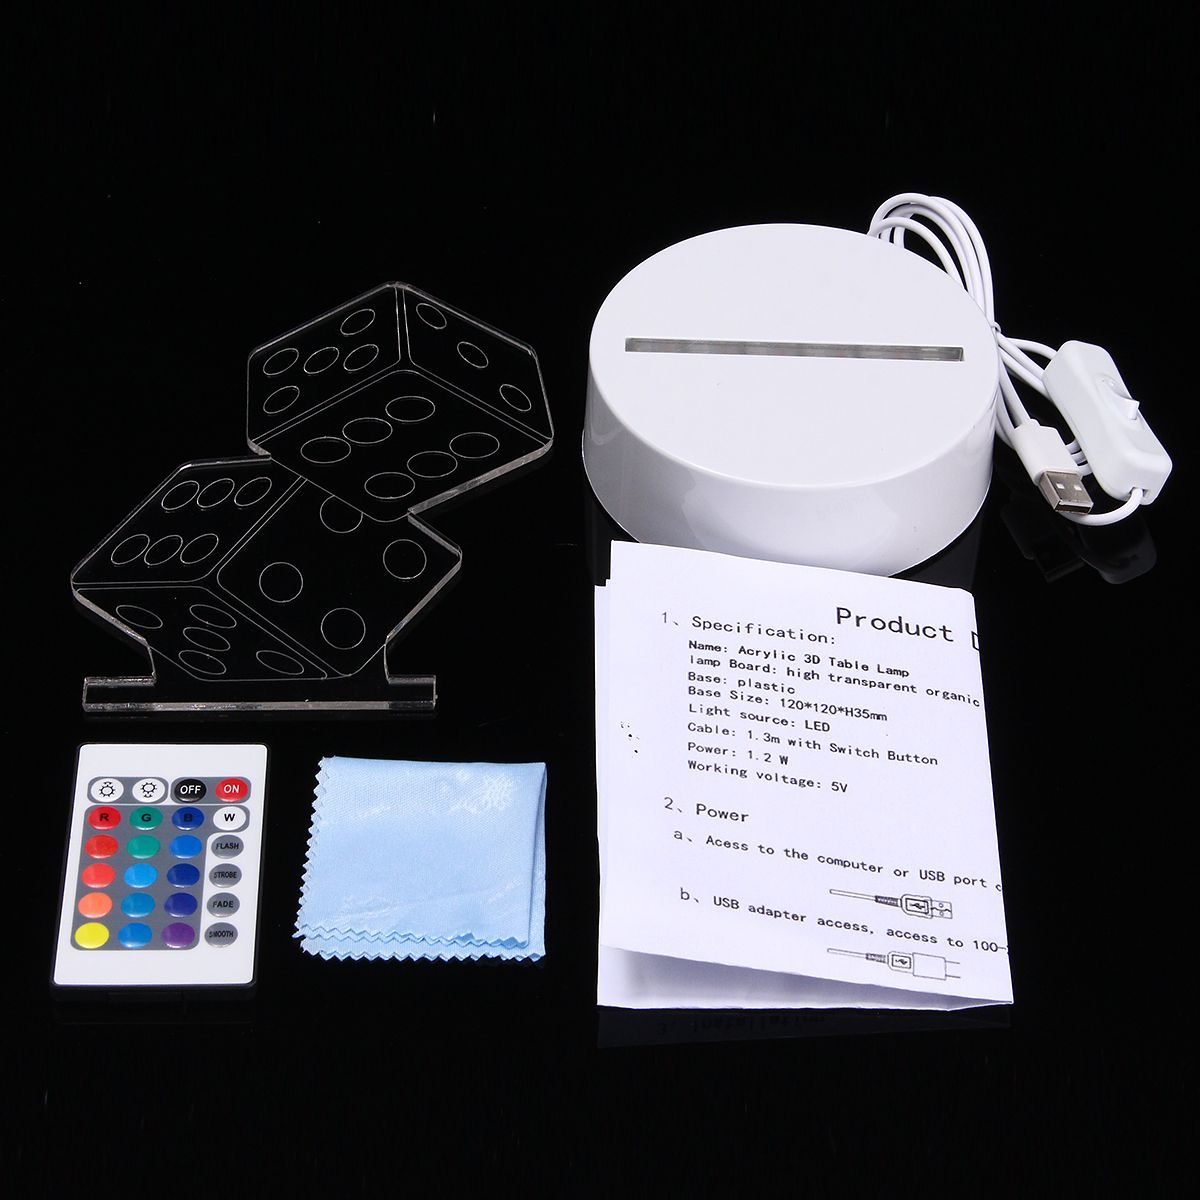 3D-Dice-Shape-RGB-USB-Night-Light-Color-Changing-LED-Table-Lamp--24-Key-Controller-Xmas-Gift-1113624